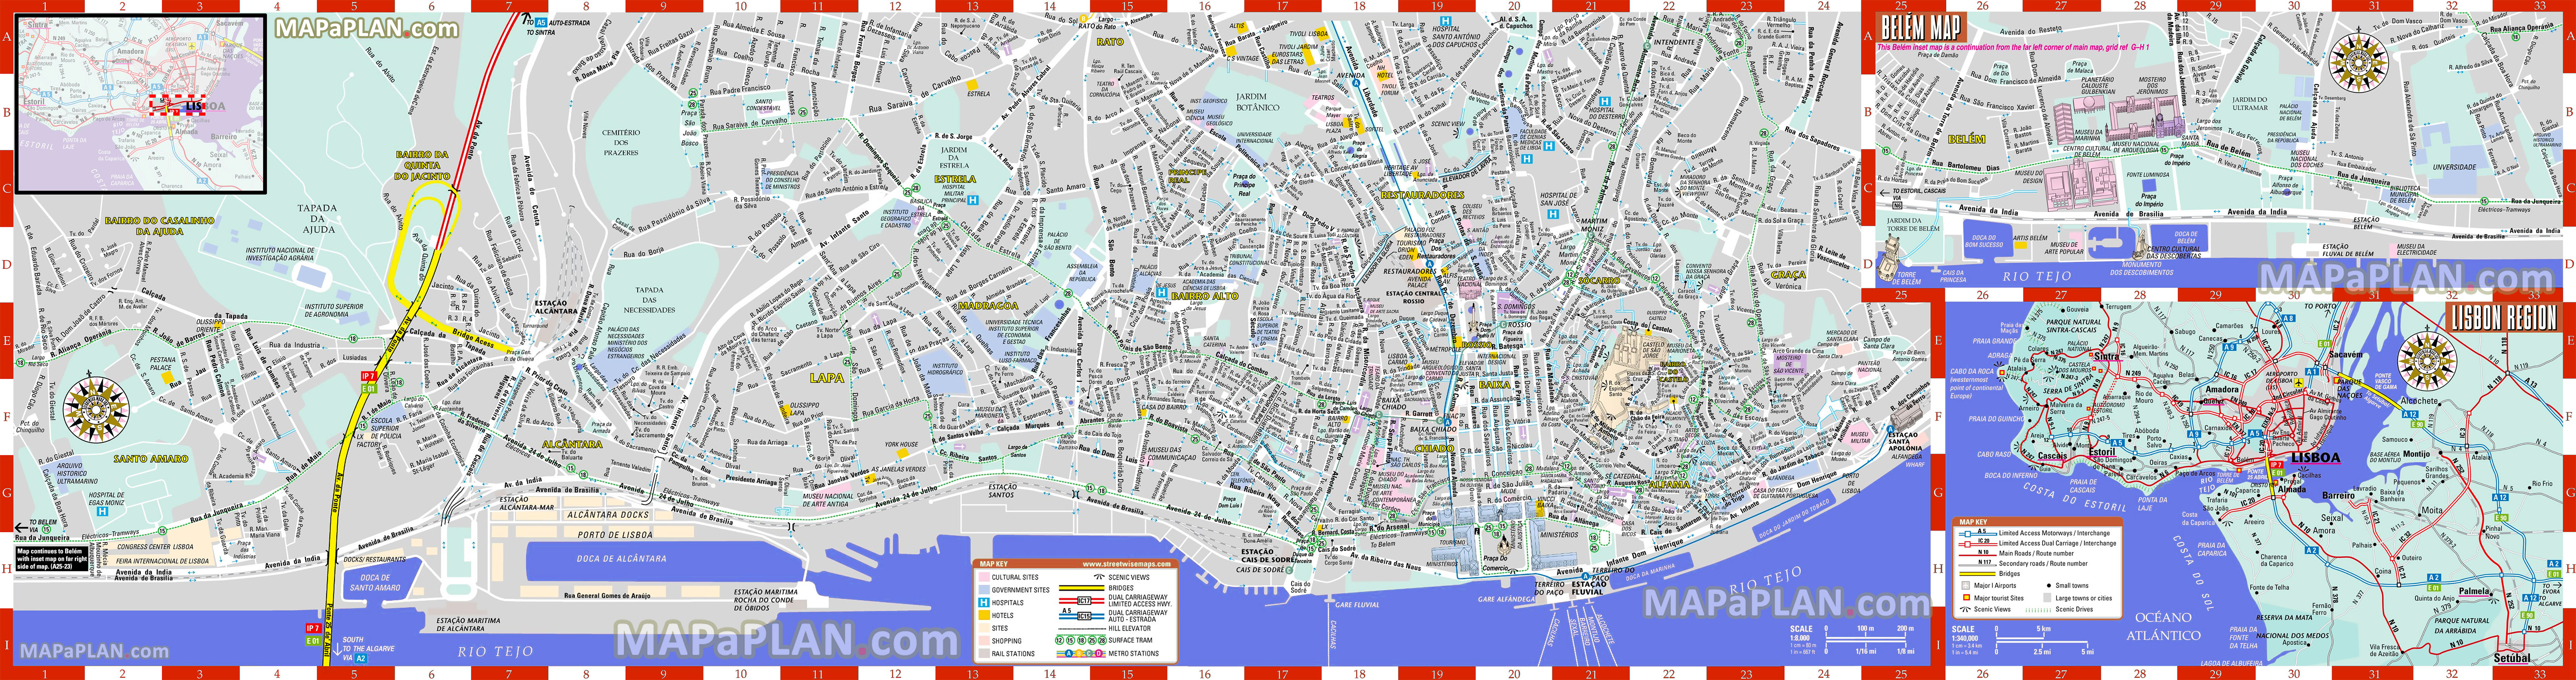 Lisbon maps Top tourist attractions Free printable city street map